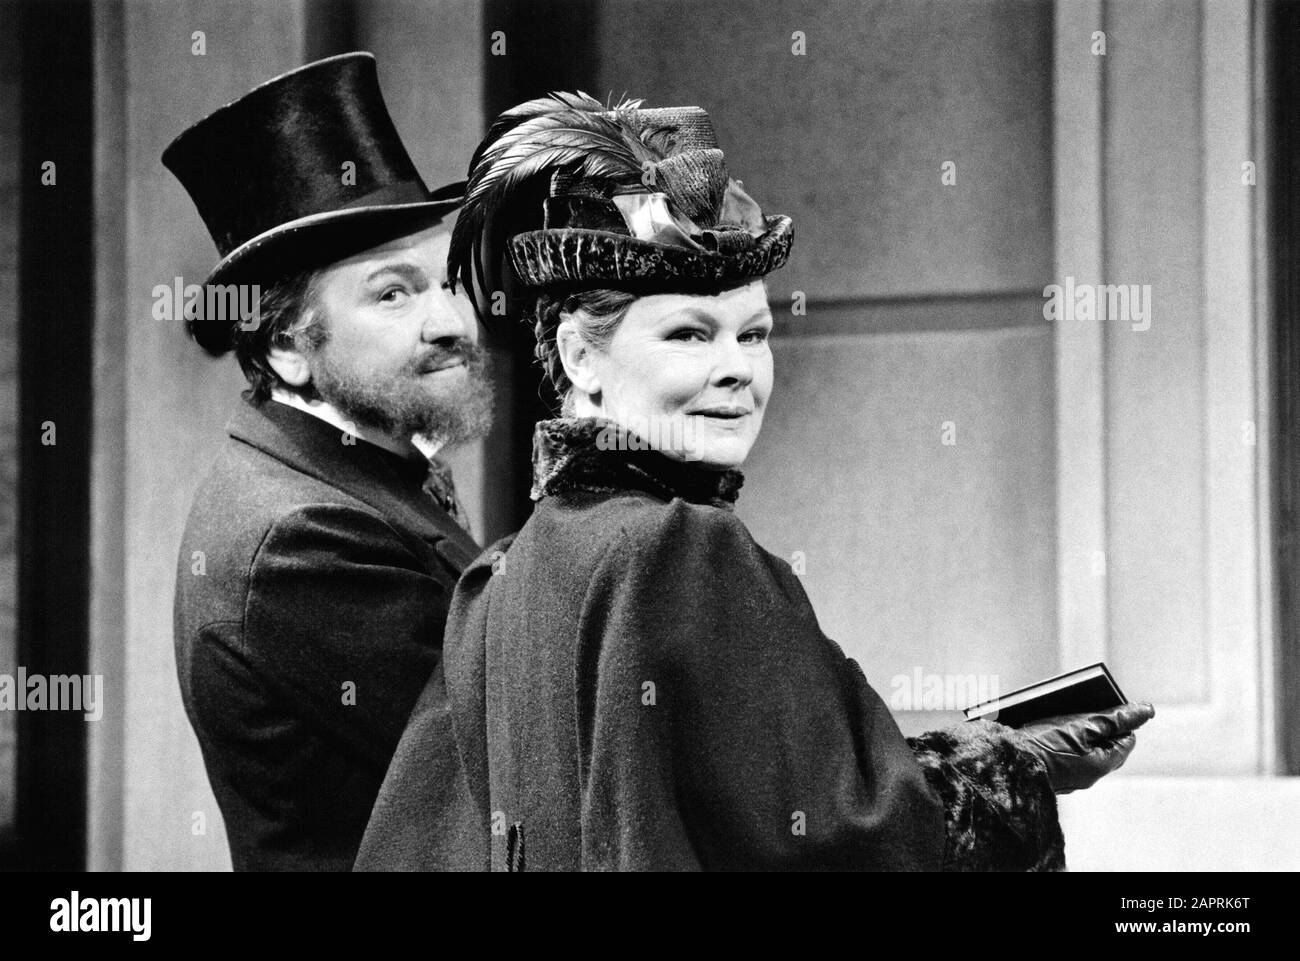 Michael Williams and Judi Dench as Charles and Carrie Pooter in MR & MRS NOBODY by Keith Waterhouse adapted from the novel 'The Diary of a Nobody' by George & Weedon Grossmith directed by Ned Sherrin at the Garrick Theatre, London in 1986. Dame Judith Olivia Dench CH DBE FRSA, born 1934. Married to the actor Michael Williams from 1971 until his death in 2001. They had one daughter, the actress Finty Williams, born in 1972. Stock Photo